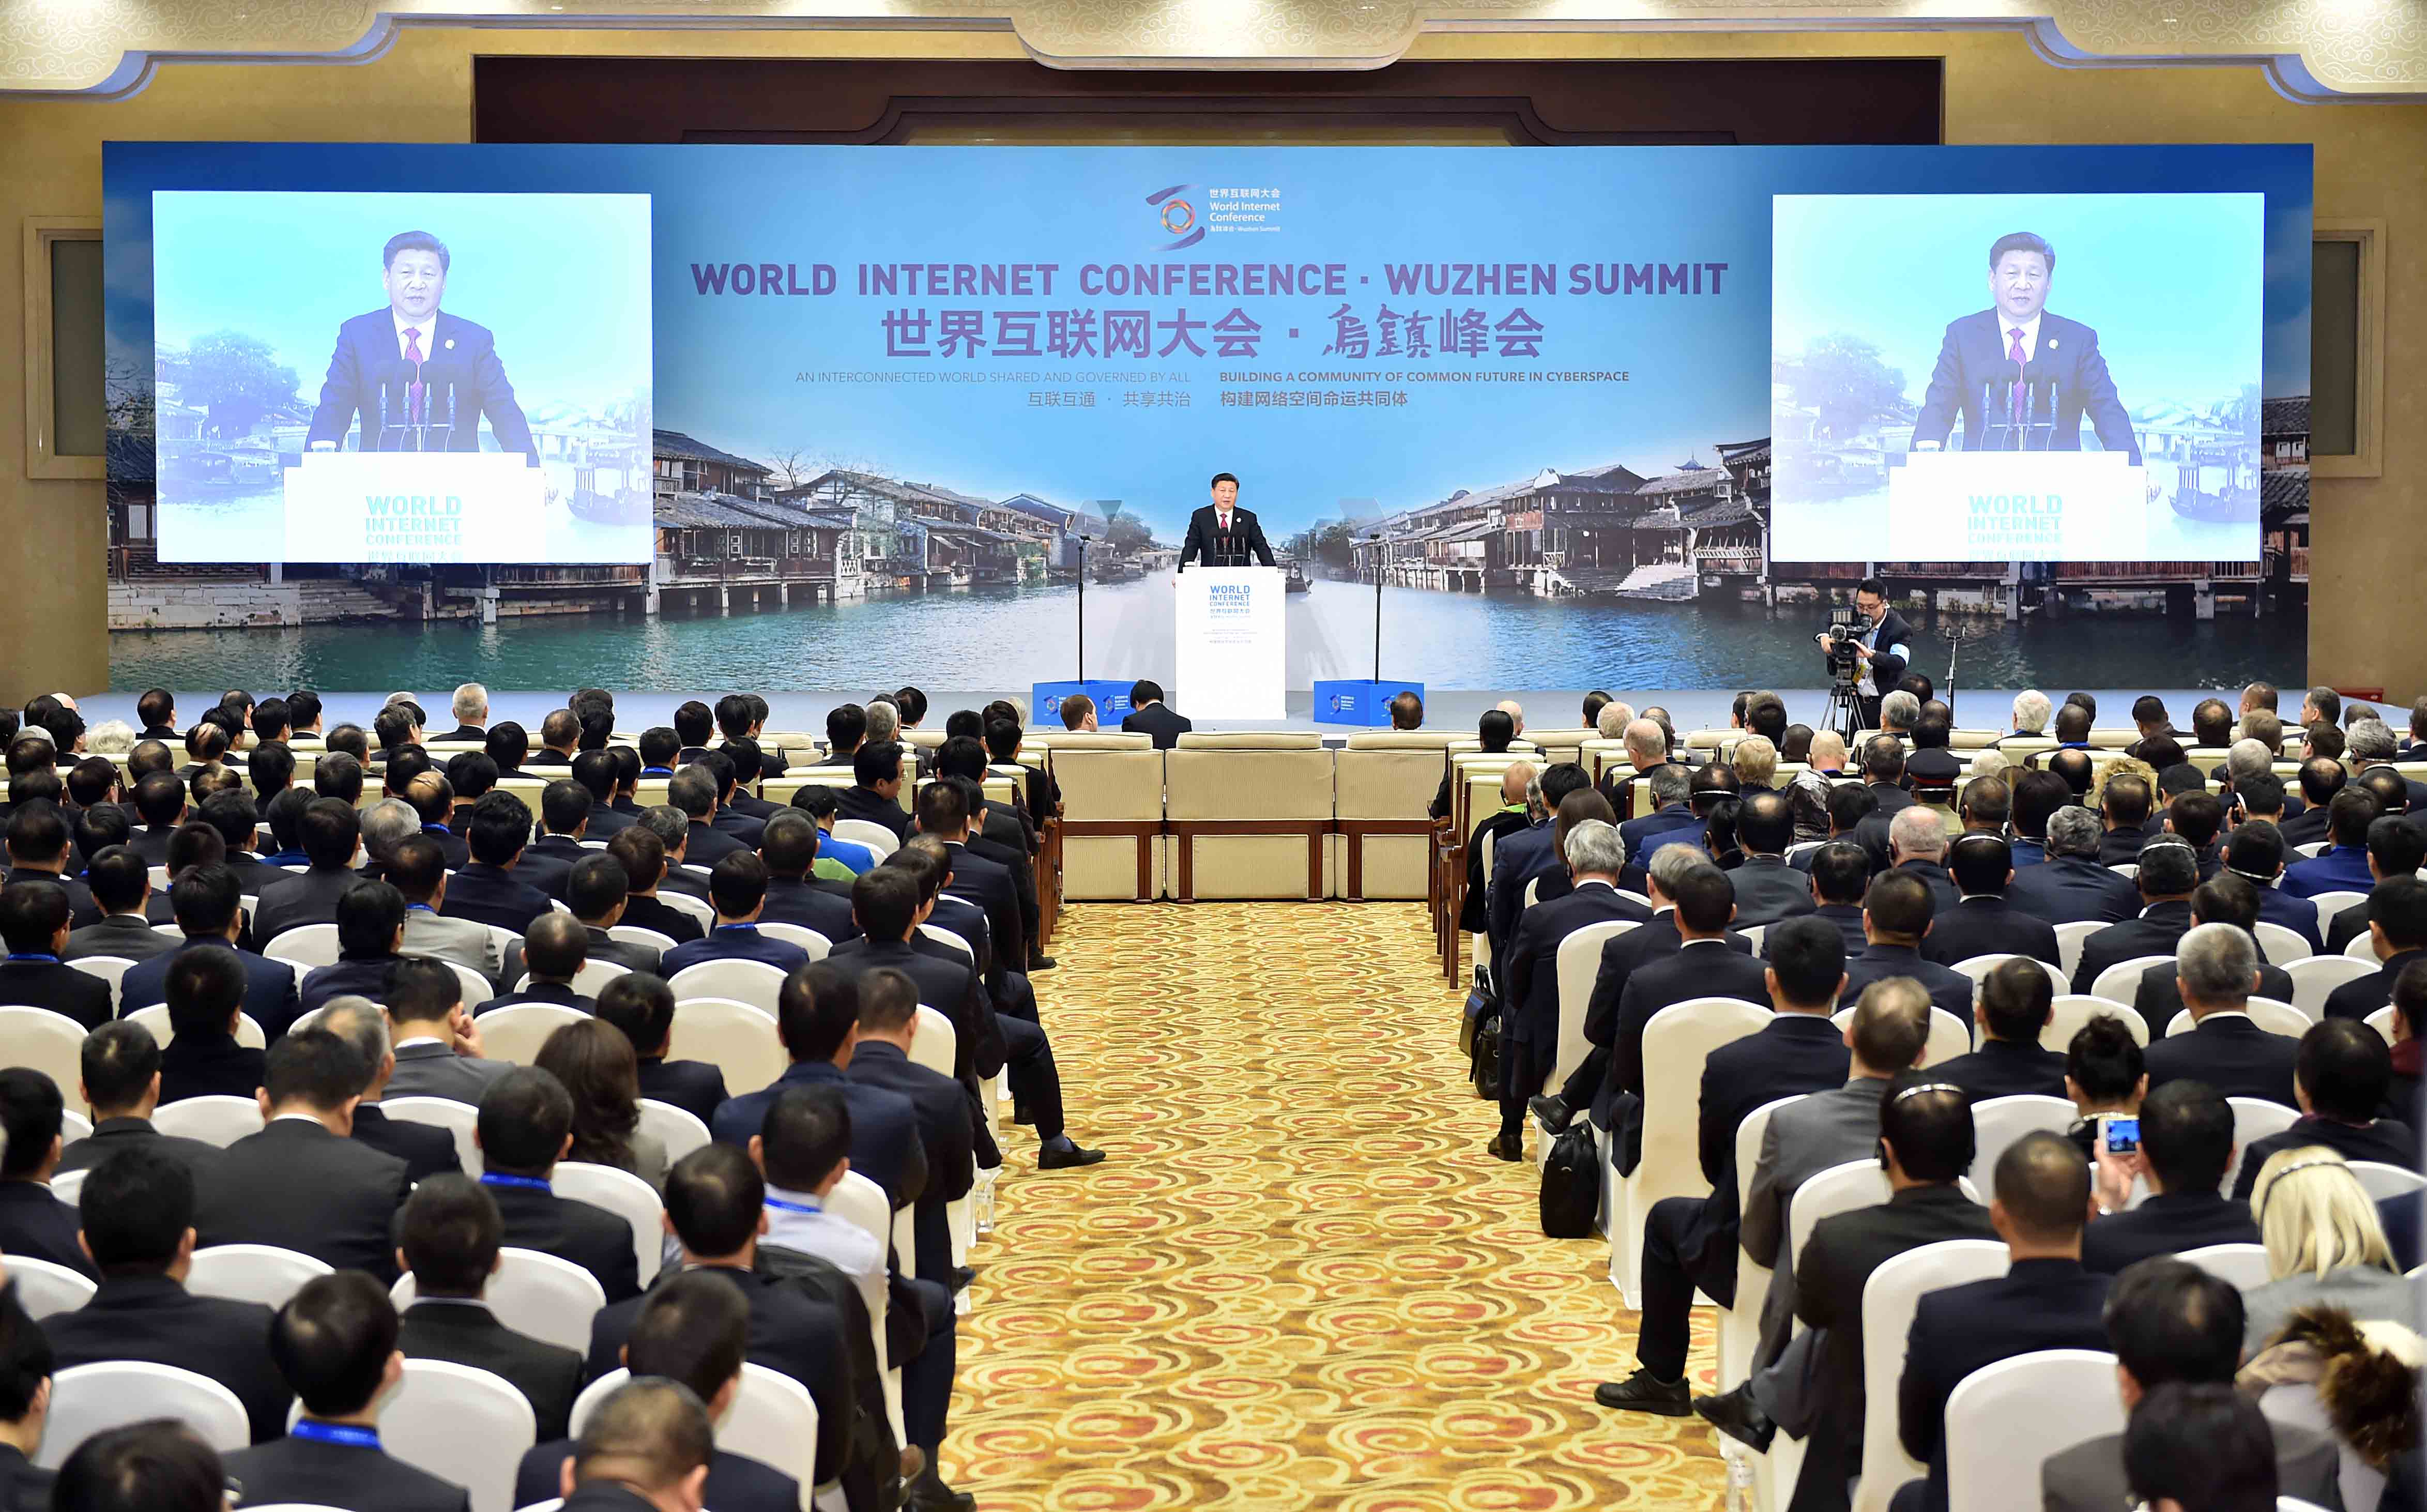 (151216) -- WUZHEN, Dec. 16, 2015 (Xinhua) -- Chinese President Xi Jinping (C) delivers a keynote speech during the opening ceremony of the Second World Internet Conference in Wuzhen Town, east China's Zhejiang Province, Dec. 16, 2015. The Second World Internet Conference opened here on Wednesday. (Xinhua/Li Tao) (zwx)